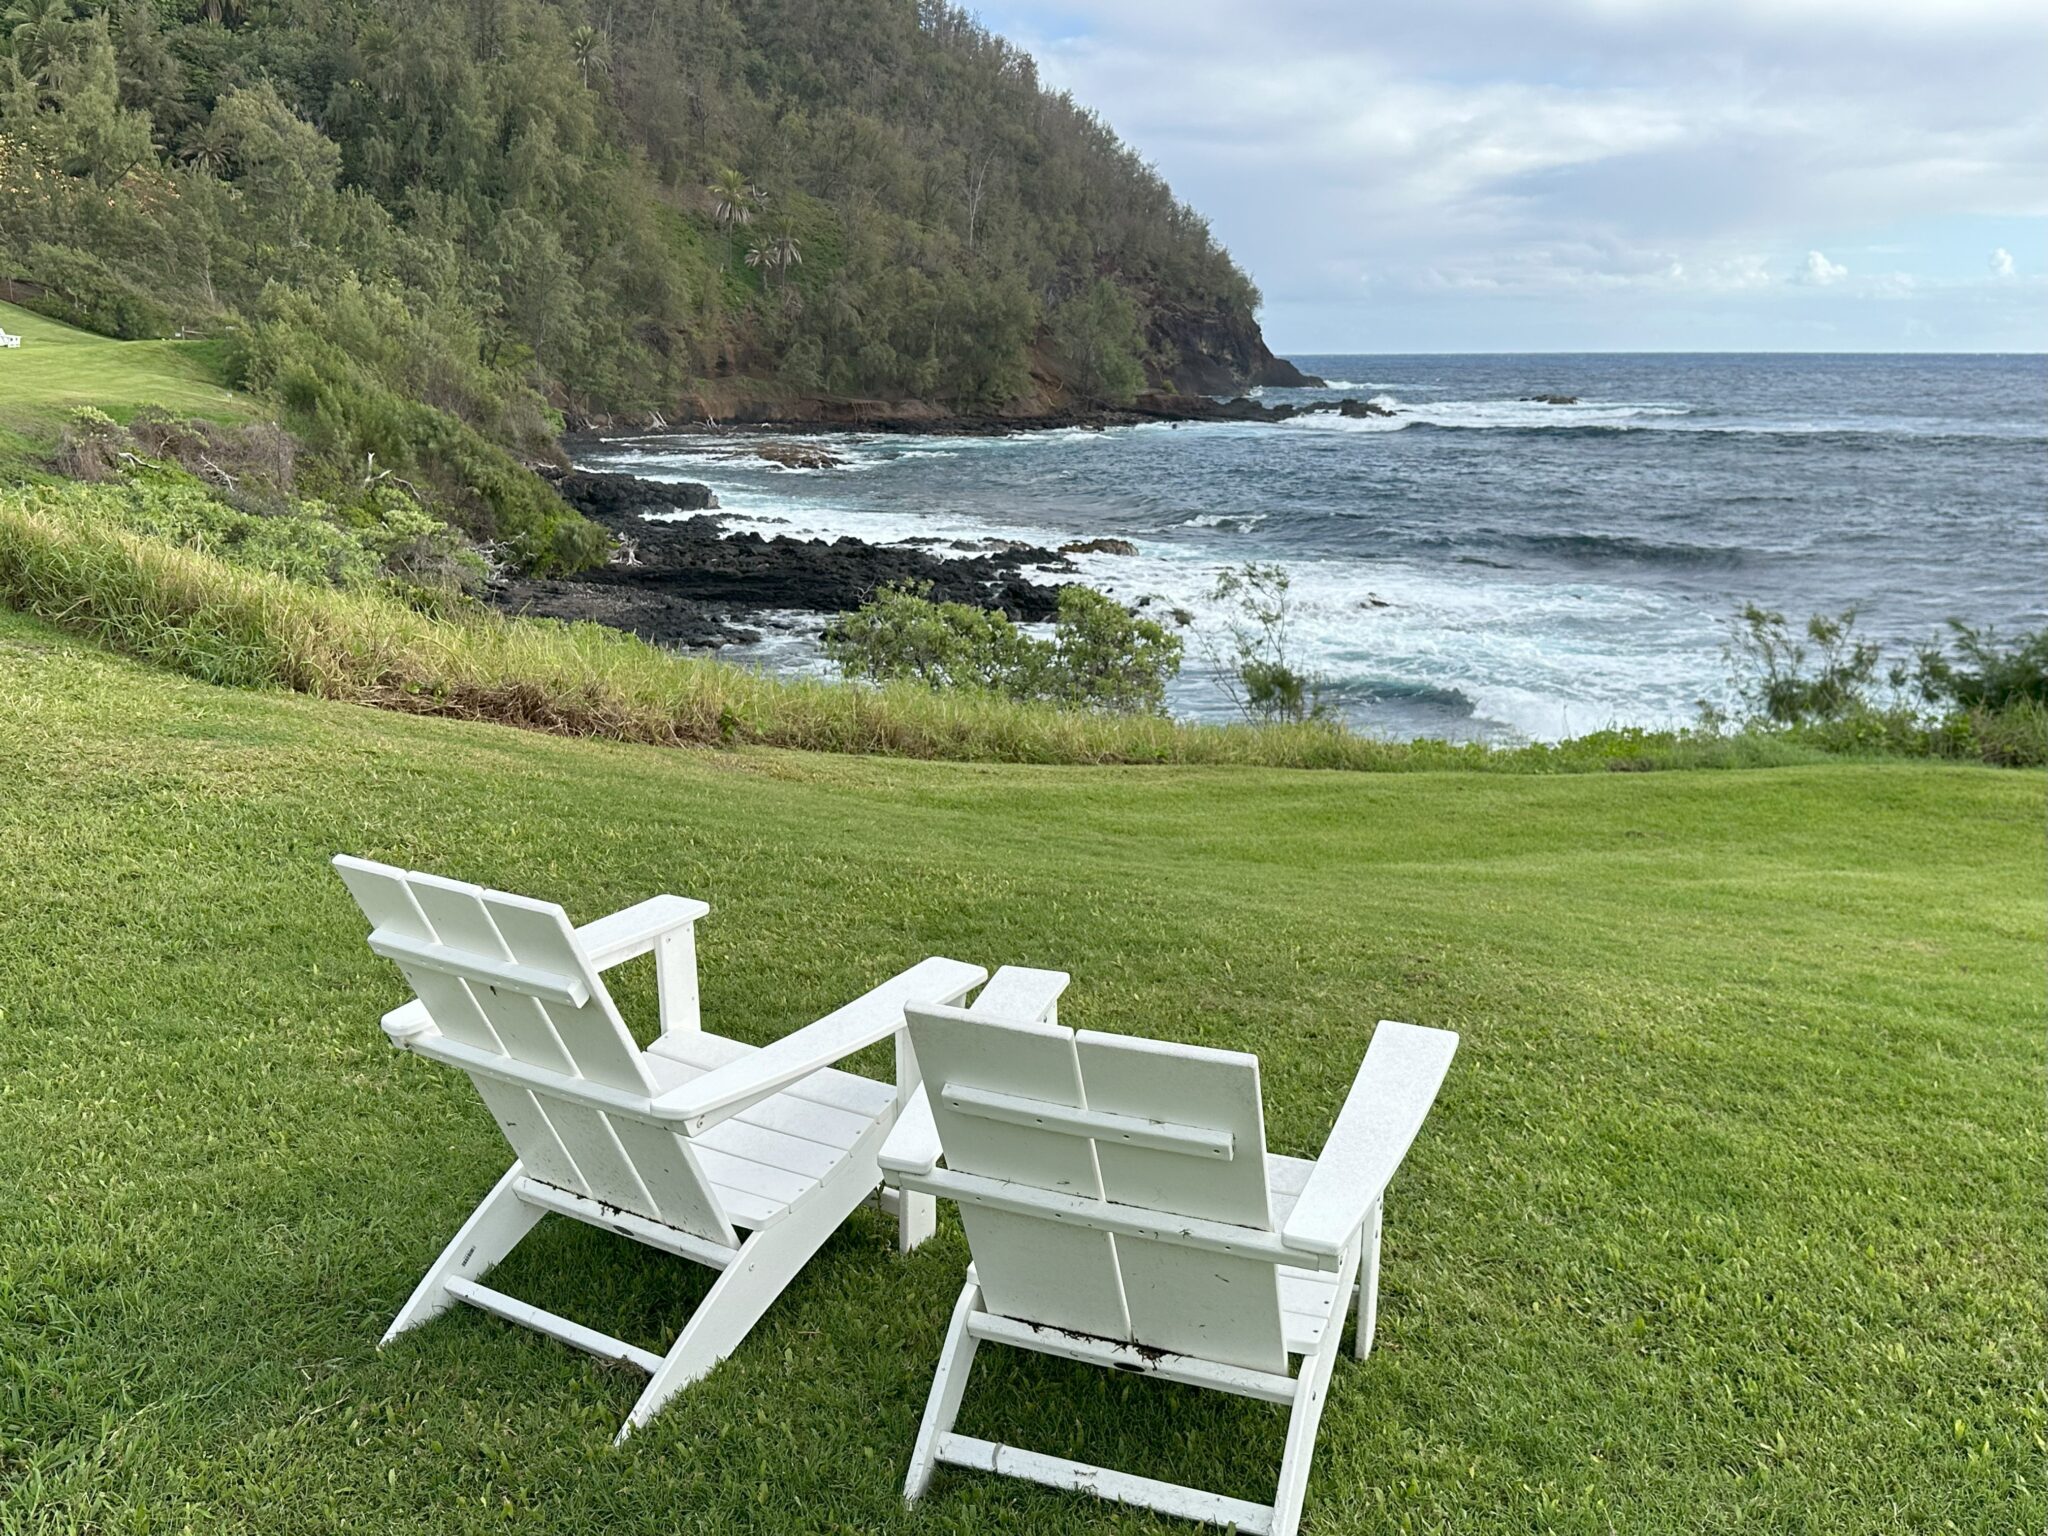 two white chairs on grass by the ocean